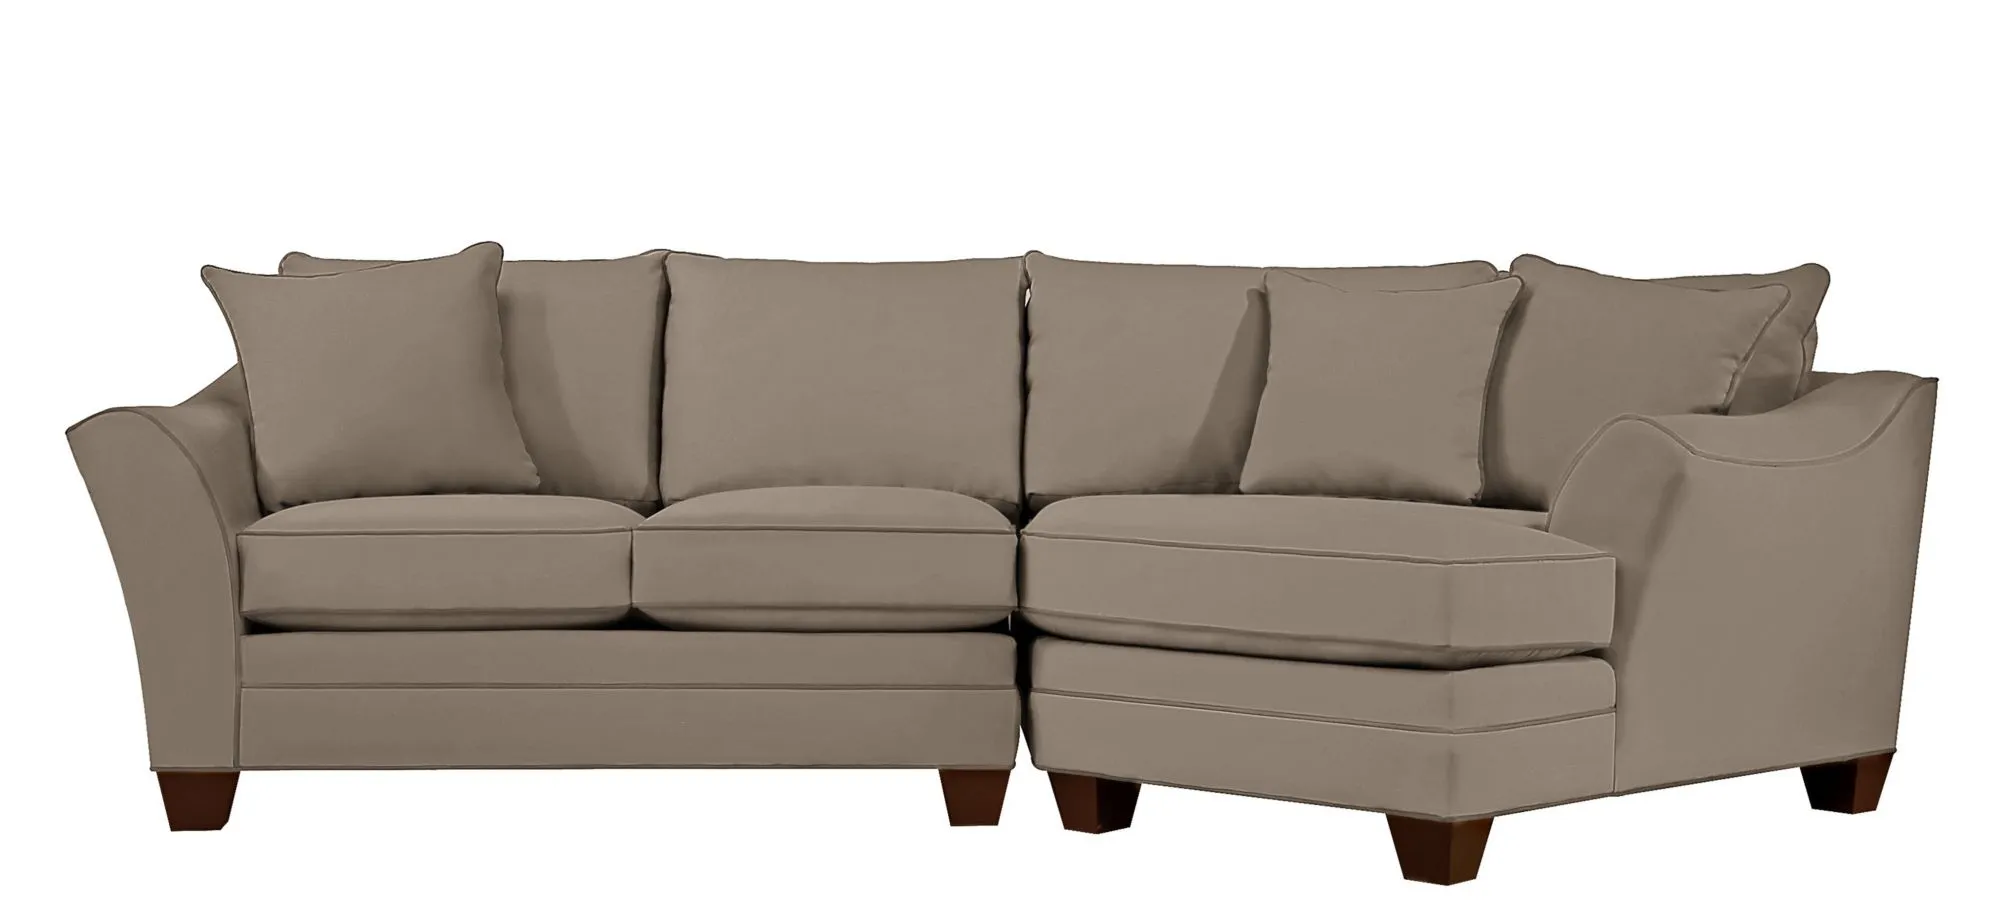 Foresthill 2-pc. Right Hand Cuddler Sectional Sofa in Suede So Soft Mineral by H.M. Richards